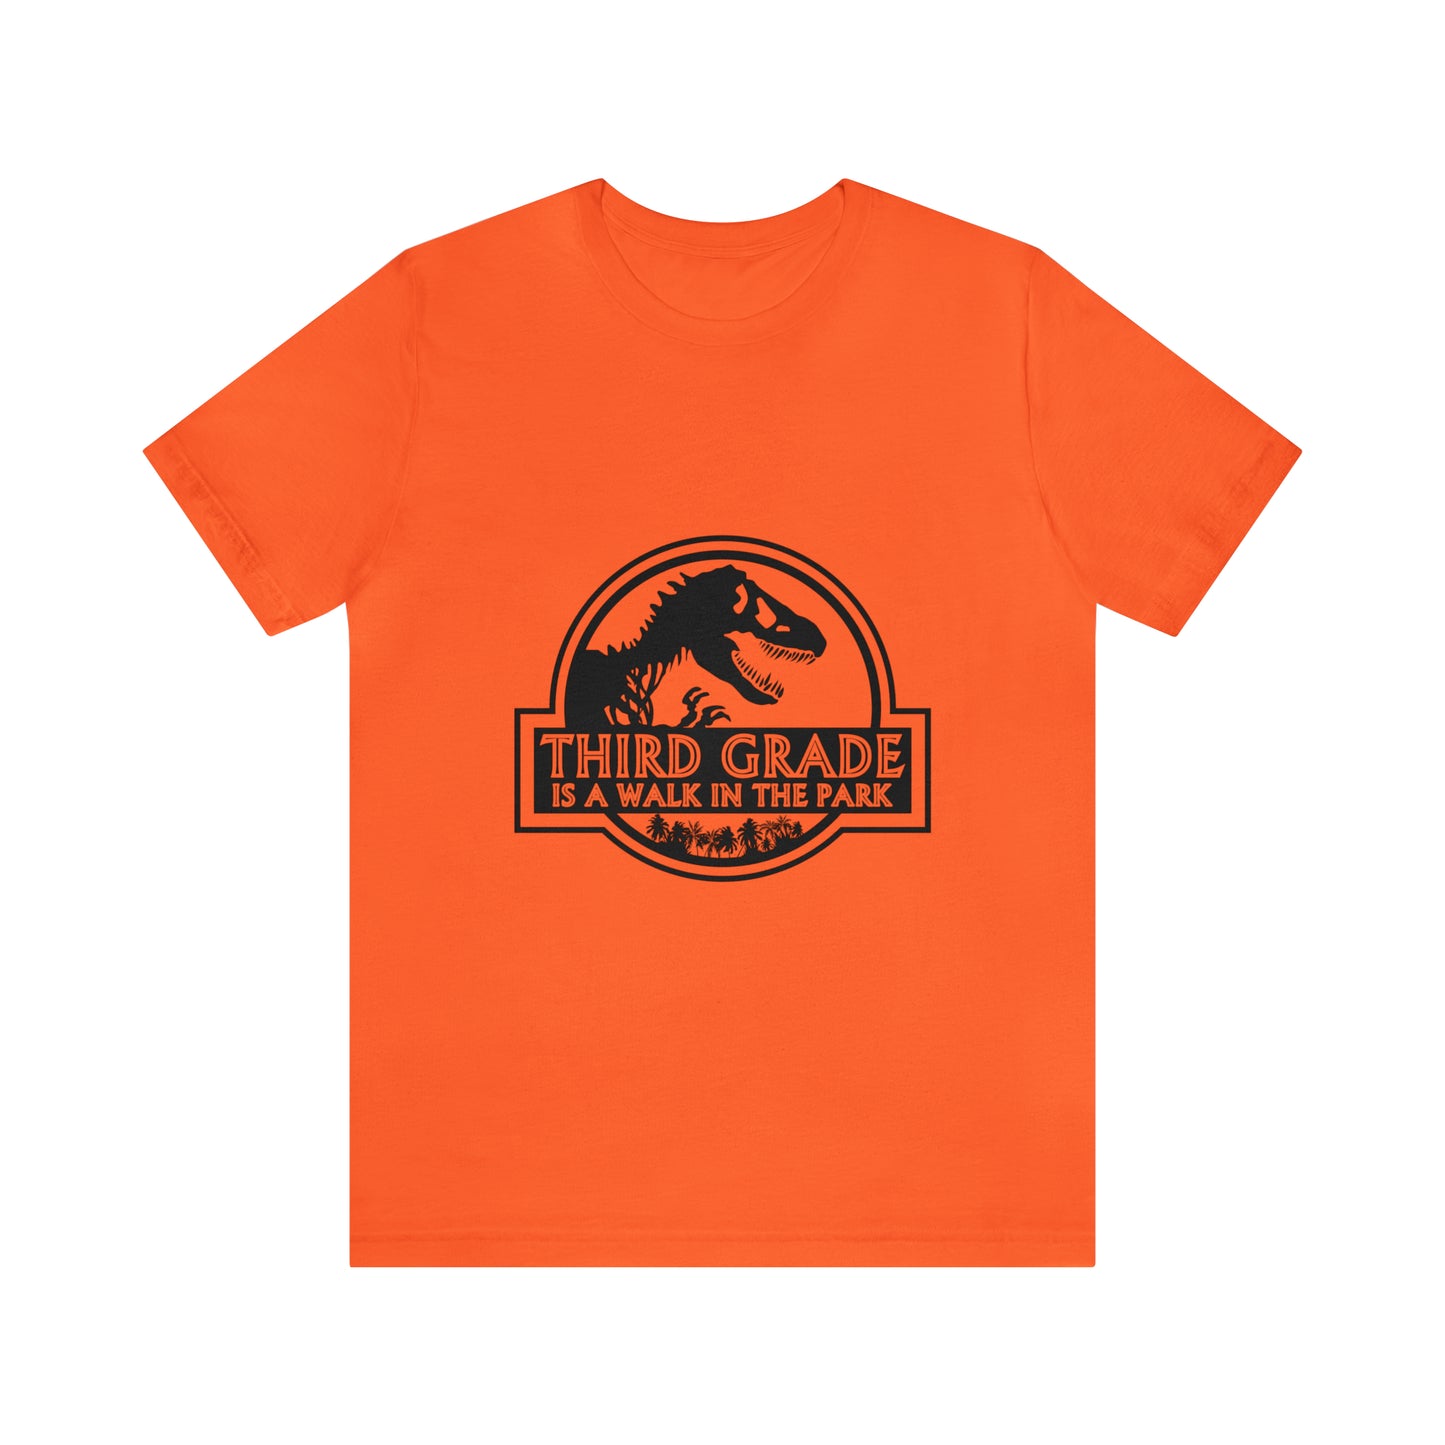 Third Grade is a Walk in the Park  tee